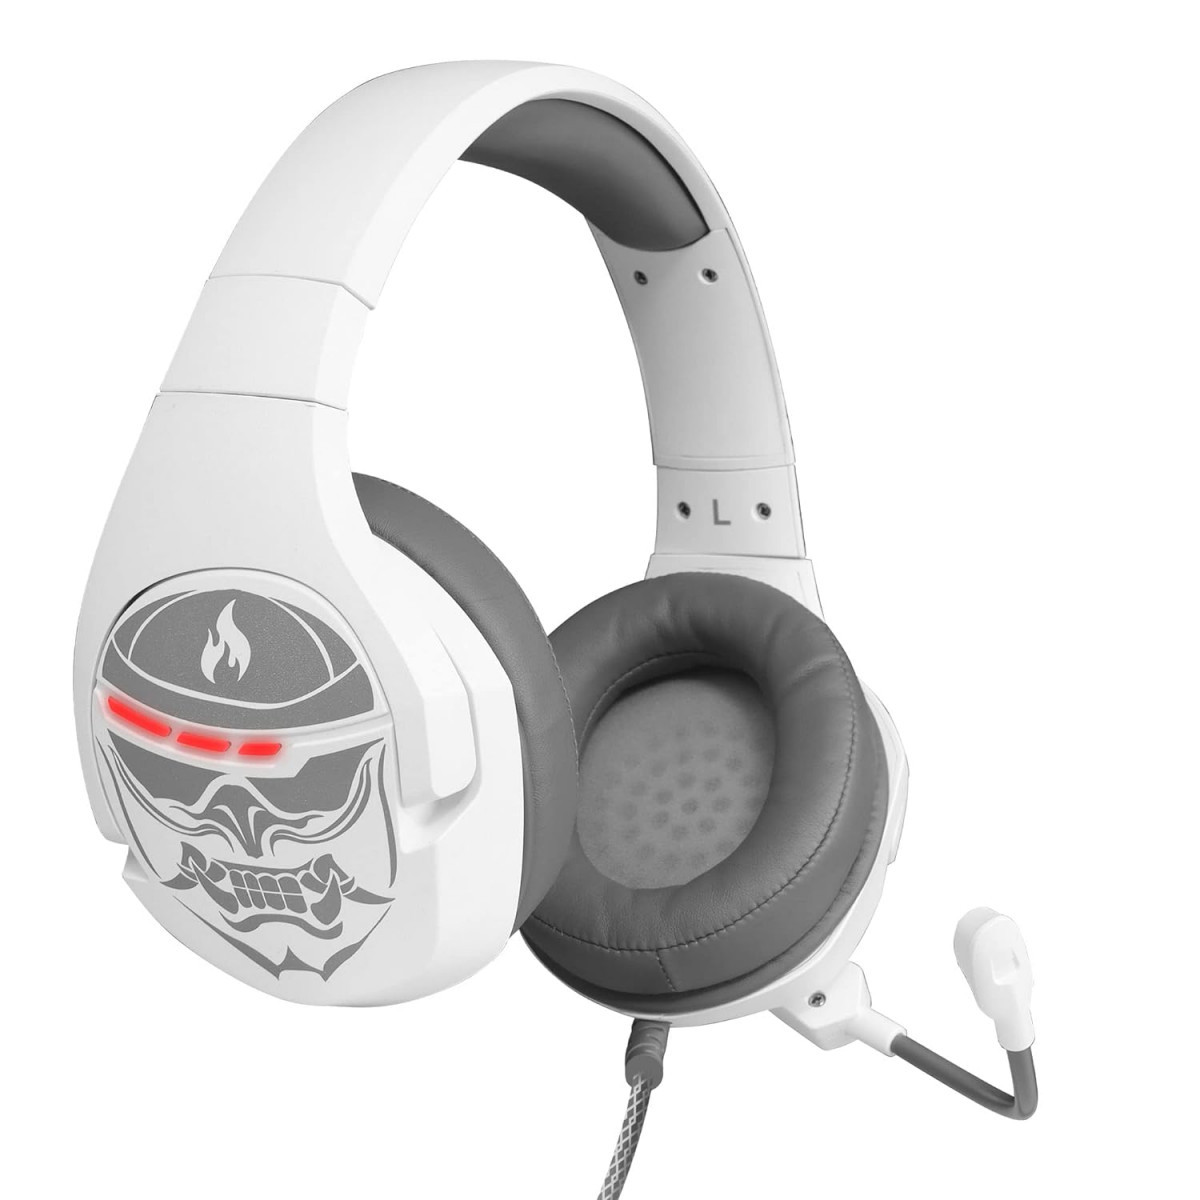 ZEBRONICS Crusher USB Gaming Wired Over Ear Headphone with Advanced Software White